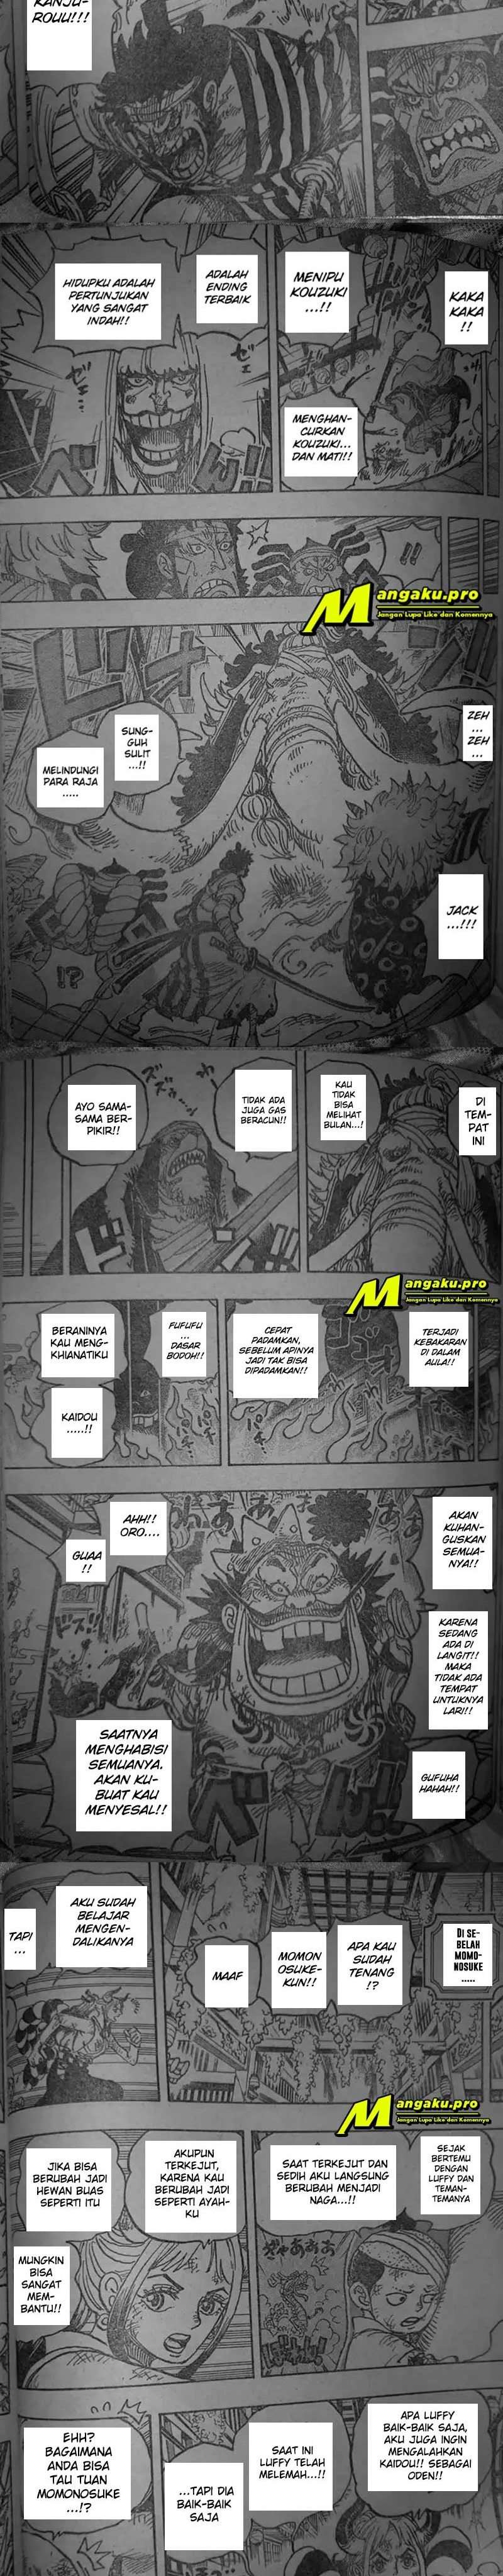 One Piece Chapter 1008 Lq - 37